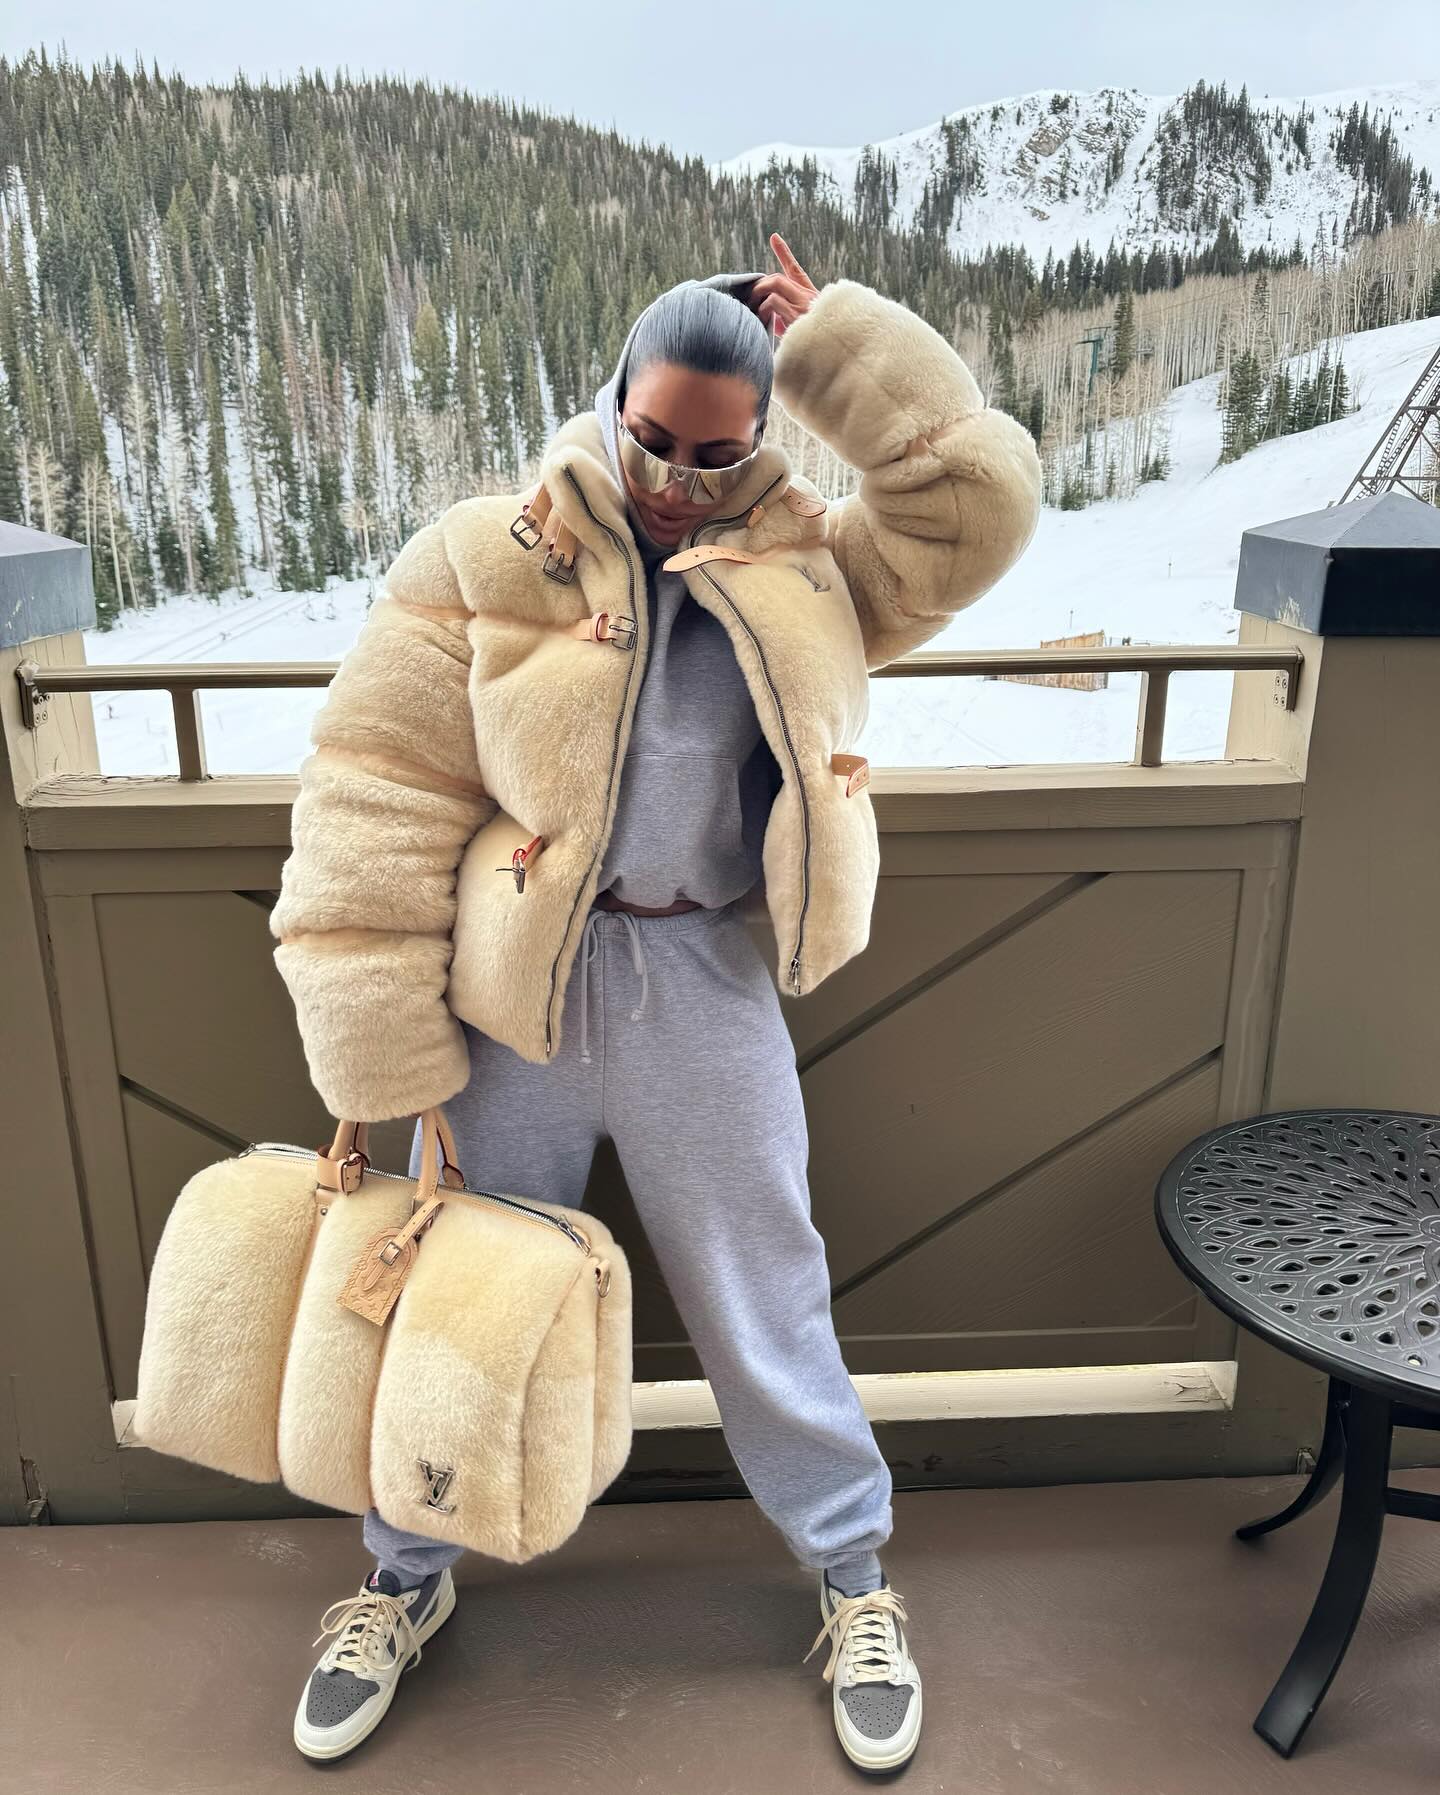 Kim Kardashian flaunts her wealth with a fur coat and Louis Vuitton bag on a snow vacation